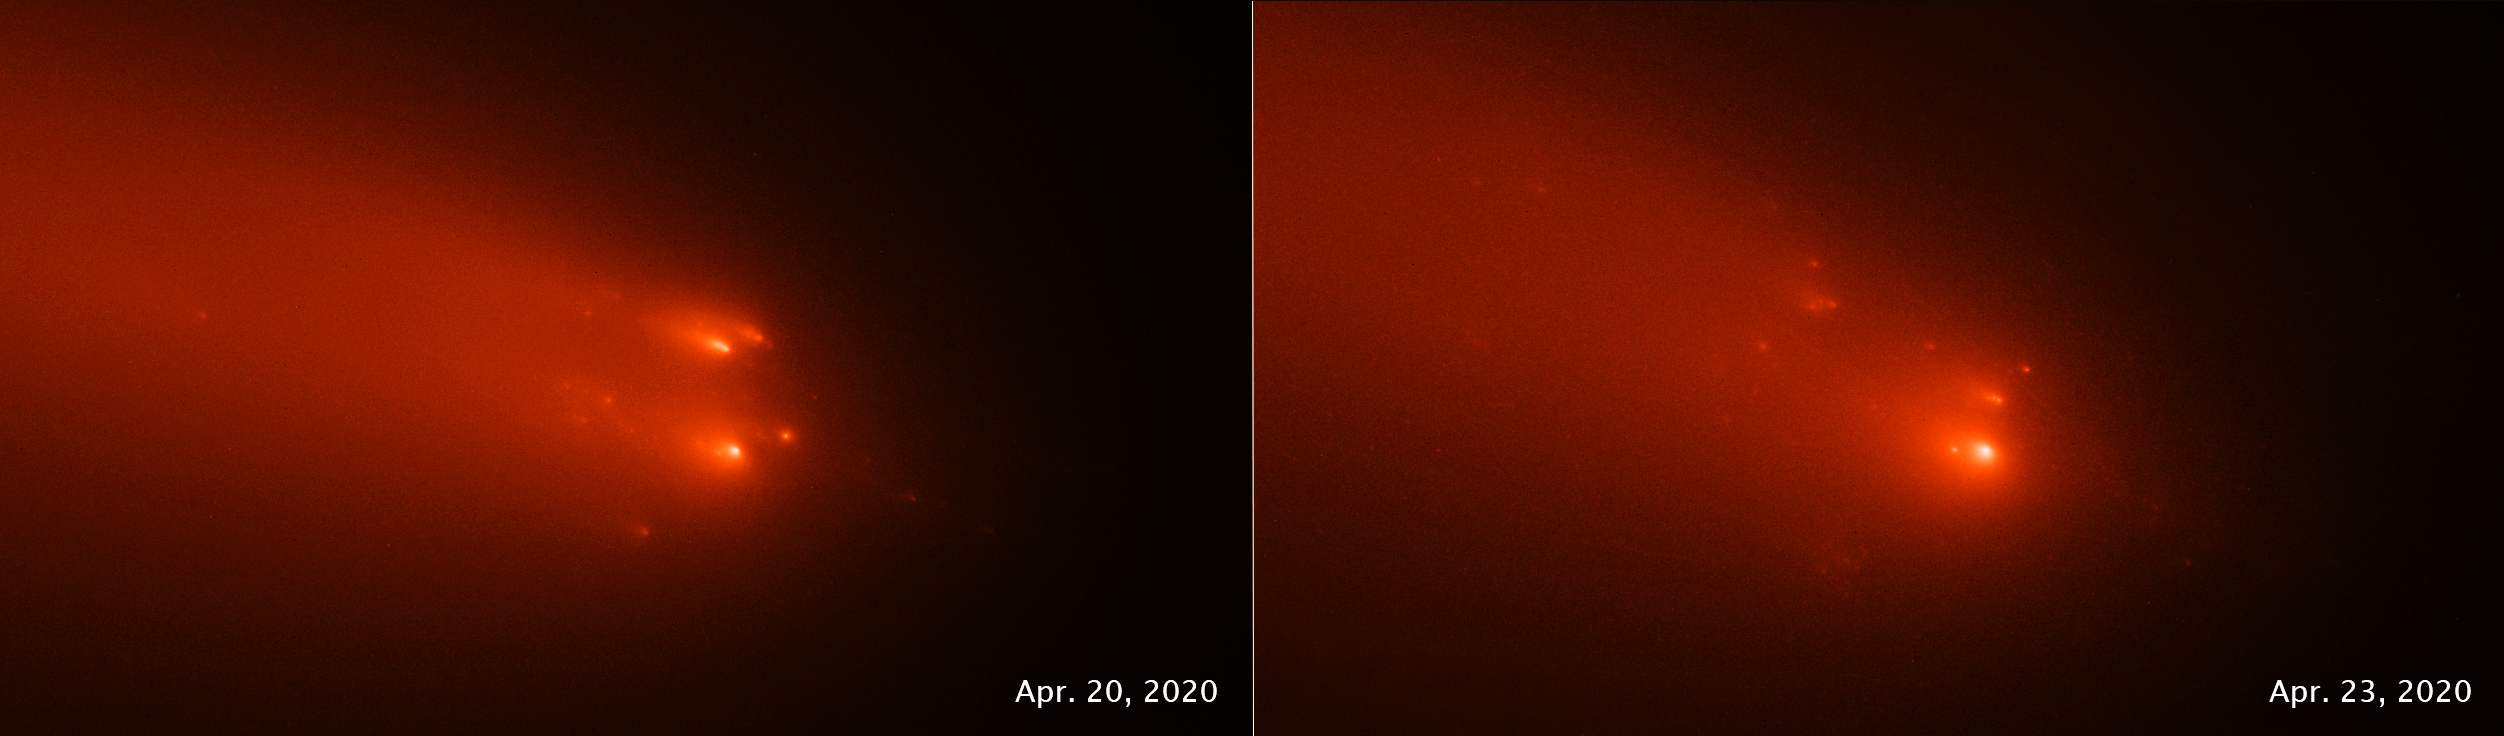 This pair of Hubble Space Telescope images of comet C/2019 Y4 (ATLAS), taken on April 20 and April 23, 2020, reveal the breakup of the solid nucleus of the come